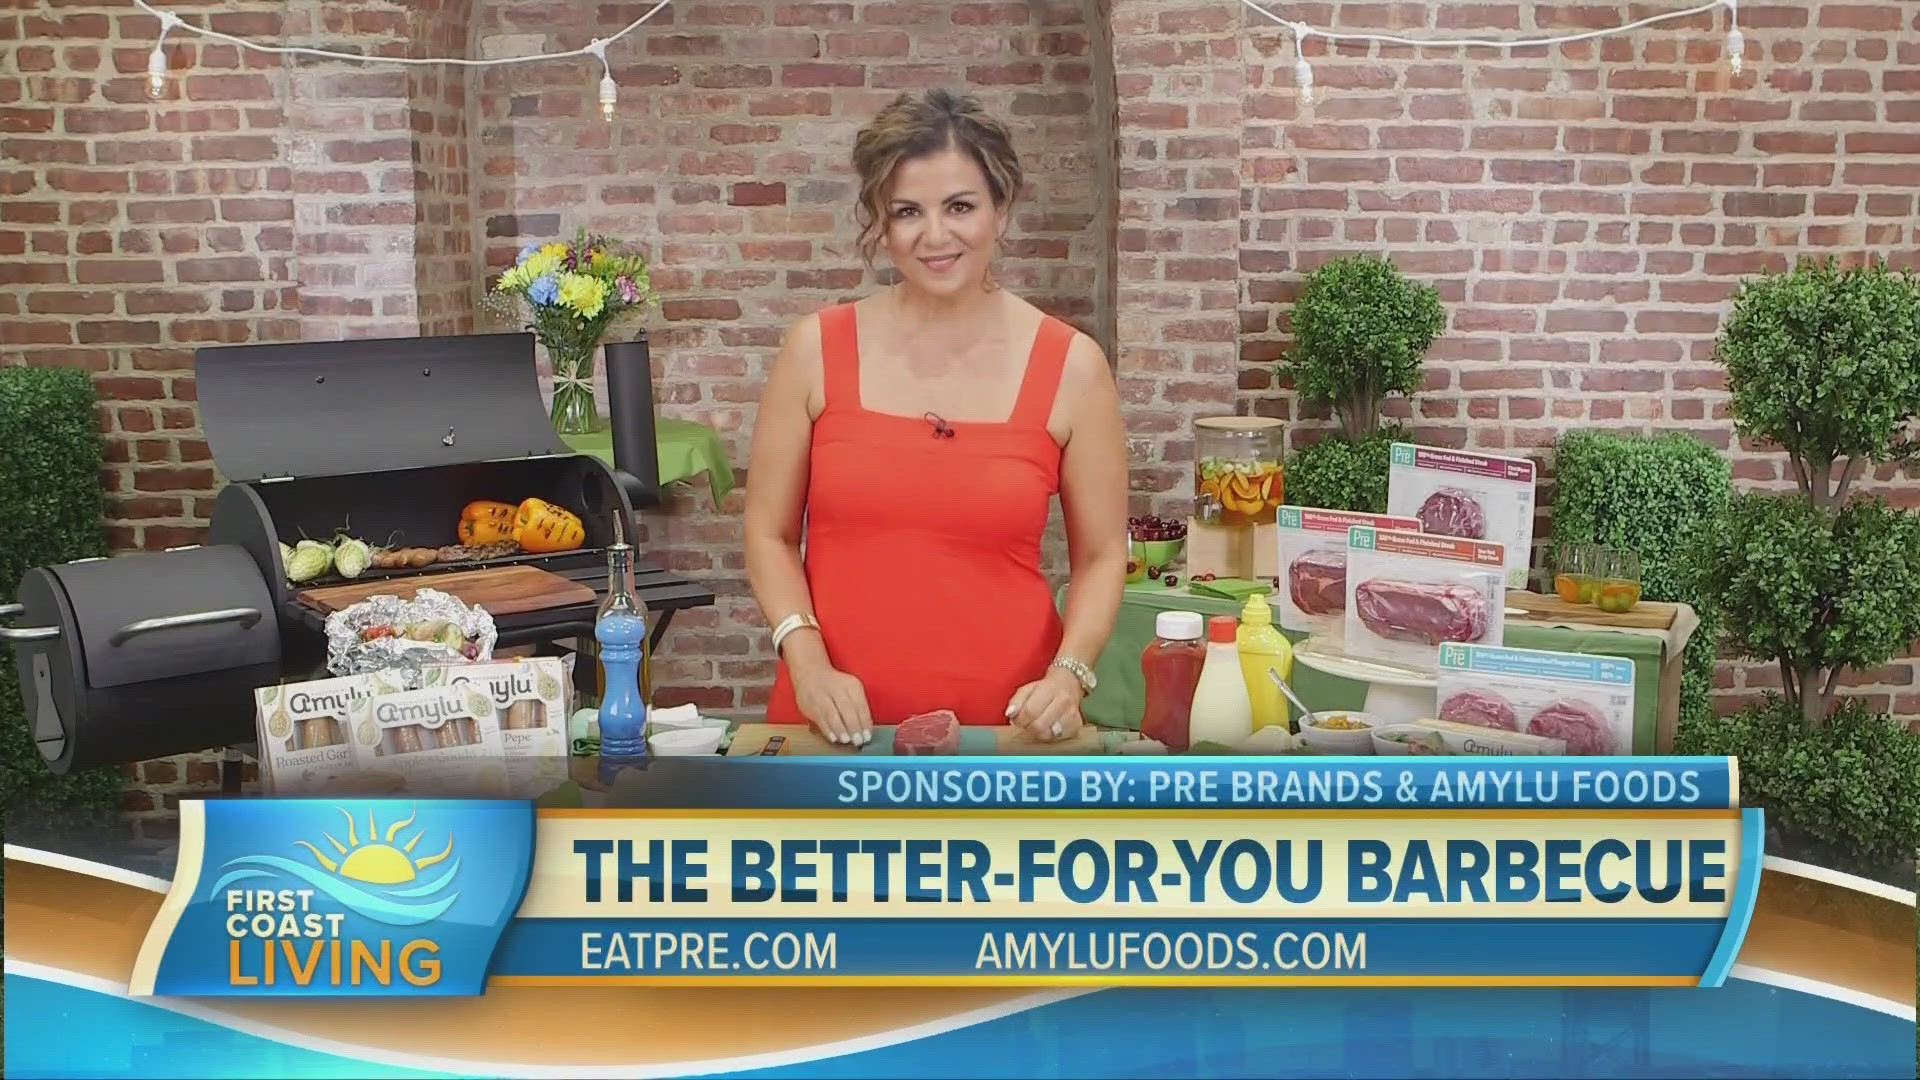 Food Network’s Martita Jara-Ferrer shares how to build the ultimate, better-for-you barbecue while still enjoying the beef you love.